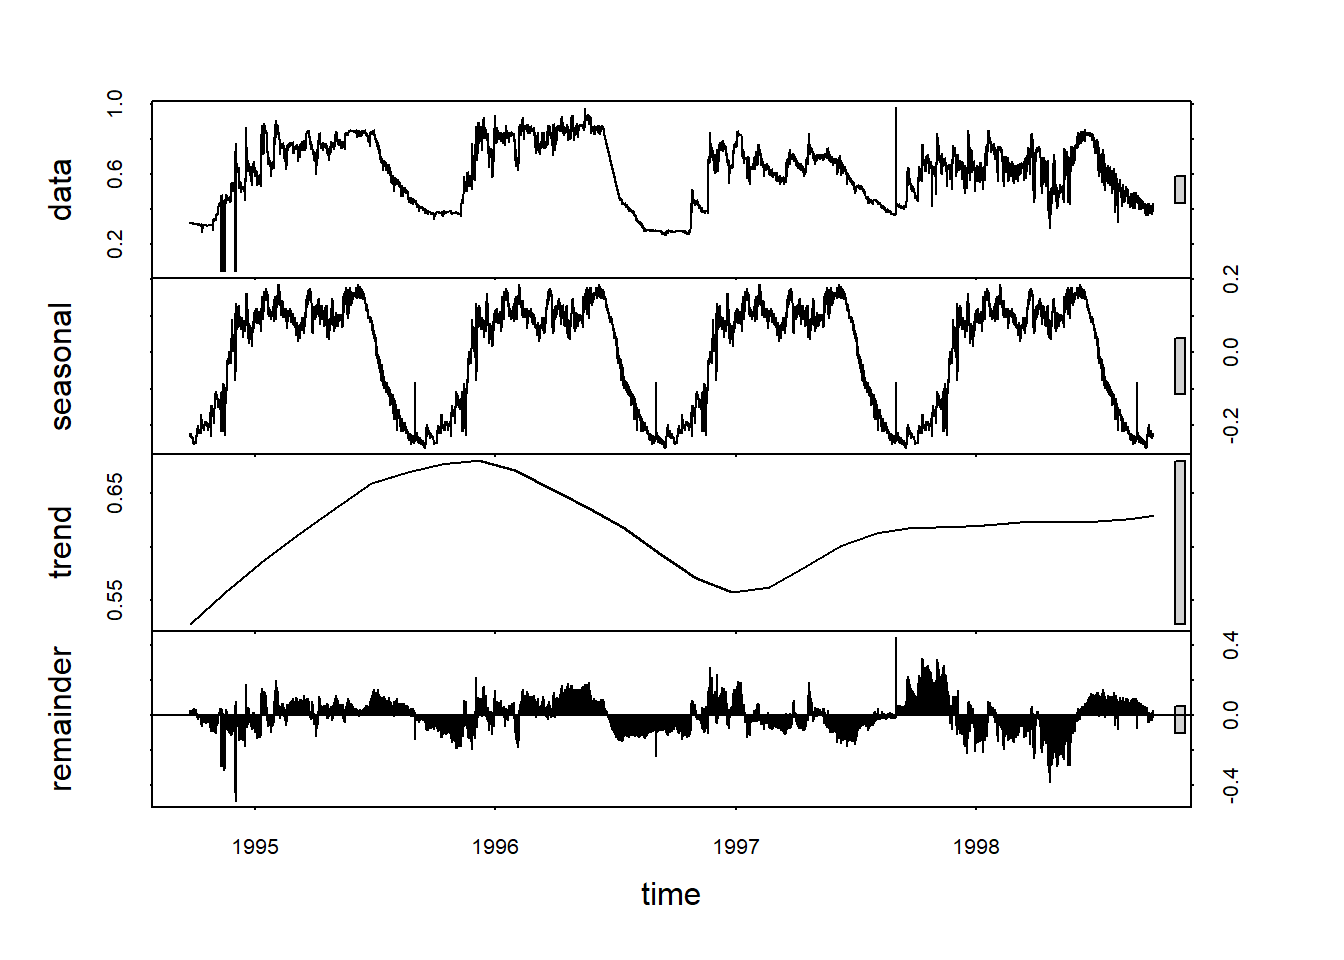 stl decomposition of Marbles water level time series